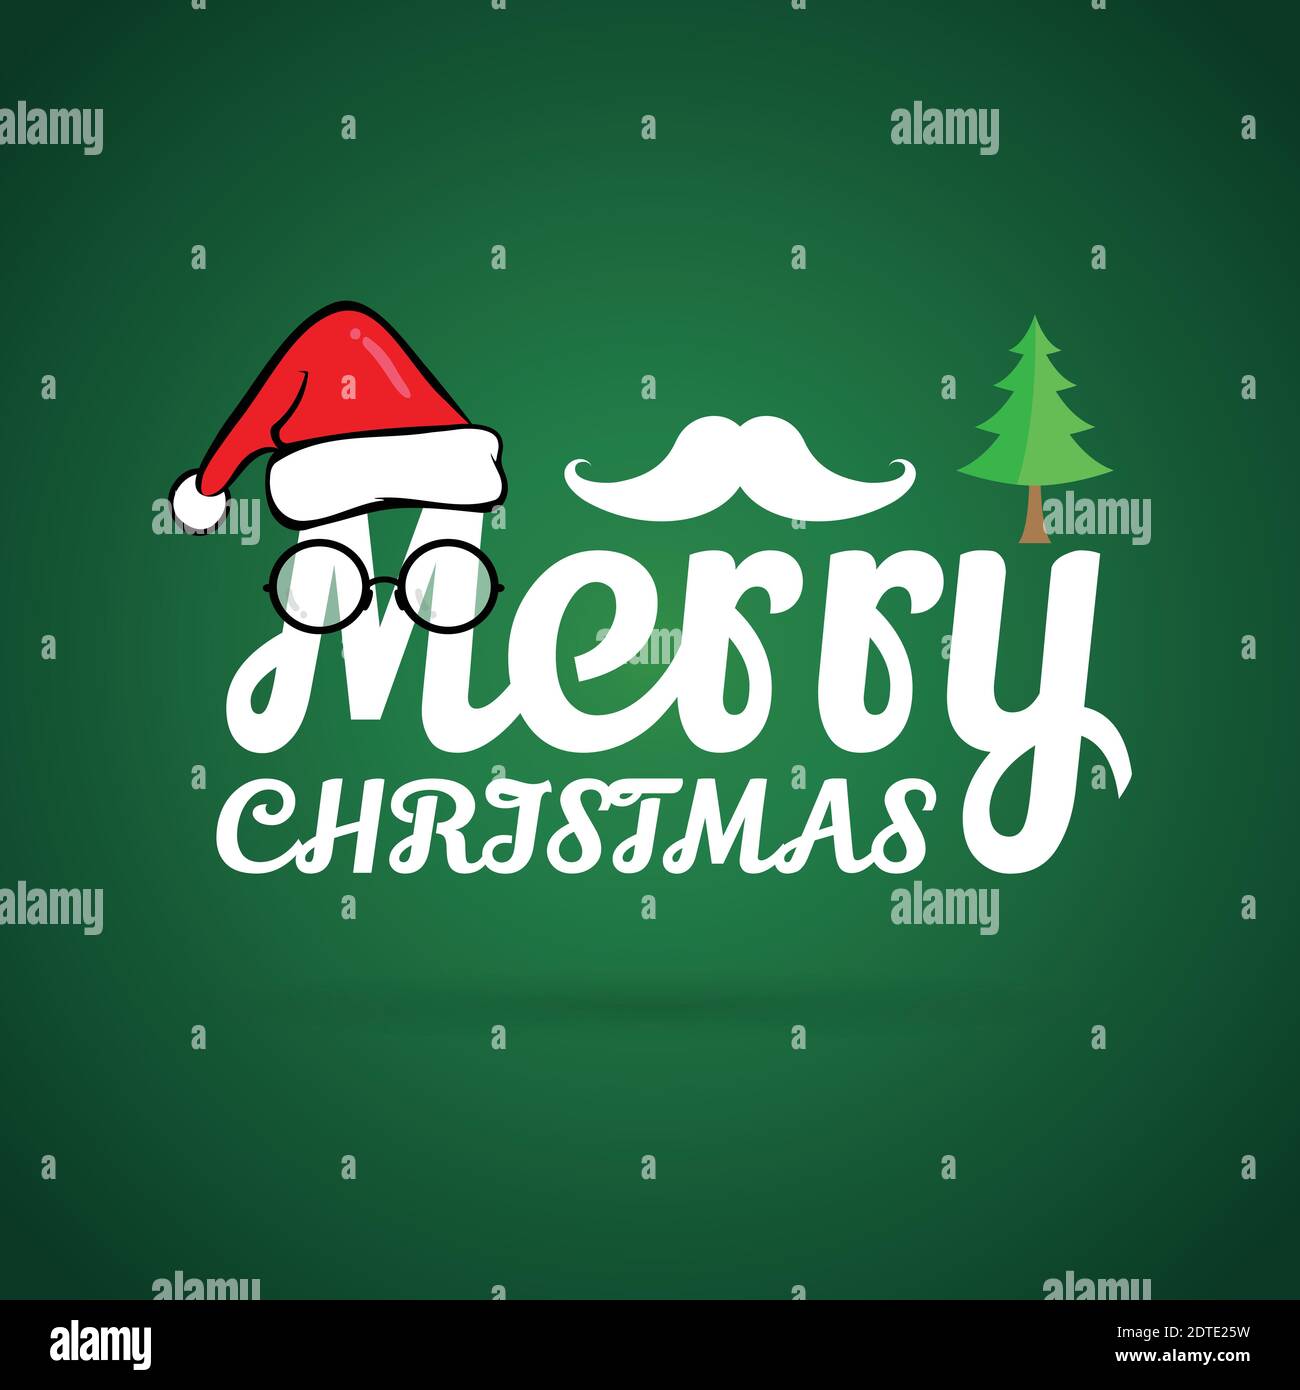 Vintage christmas card, Santa hat and mustache, Merry christmas lettering on green background Stock Vector